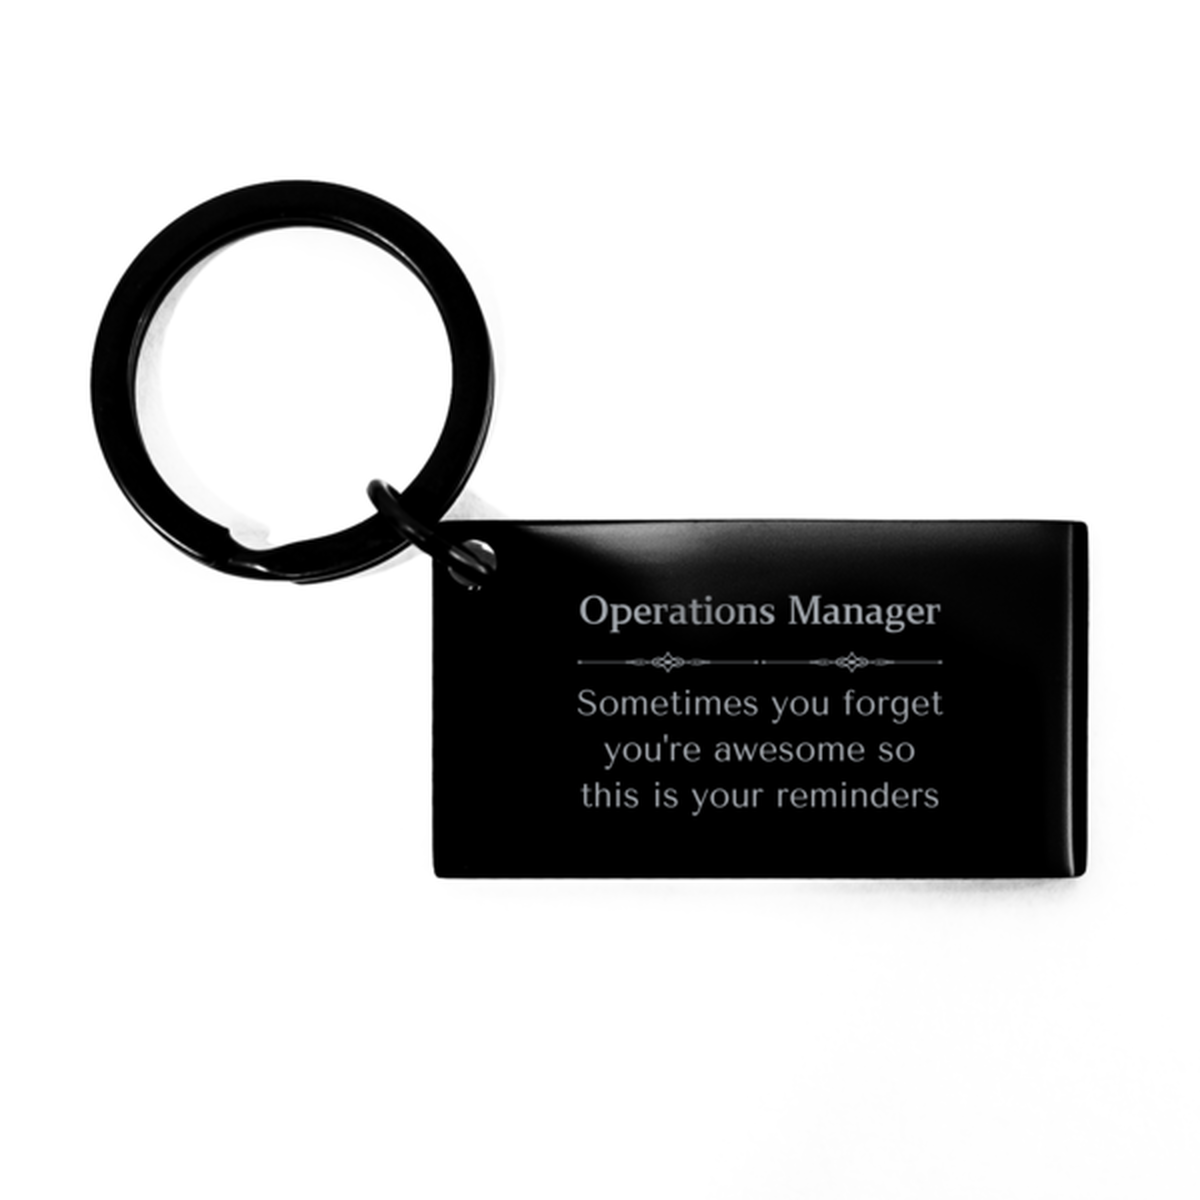 Sentimental Operations Manager Keychain, Podiatrist Sometimes you forget you're awesome so this is your reminders, Graduation Christmas Birthday Gifts for Operations Manager, Men, Women, Coworkers